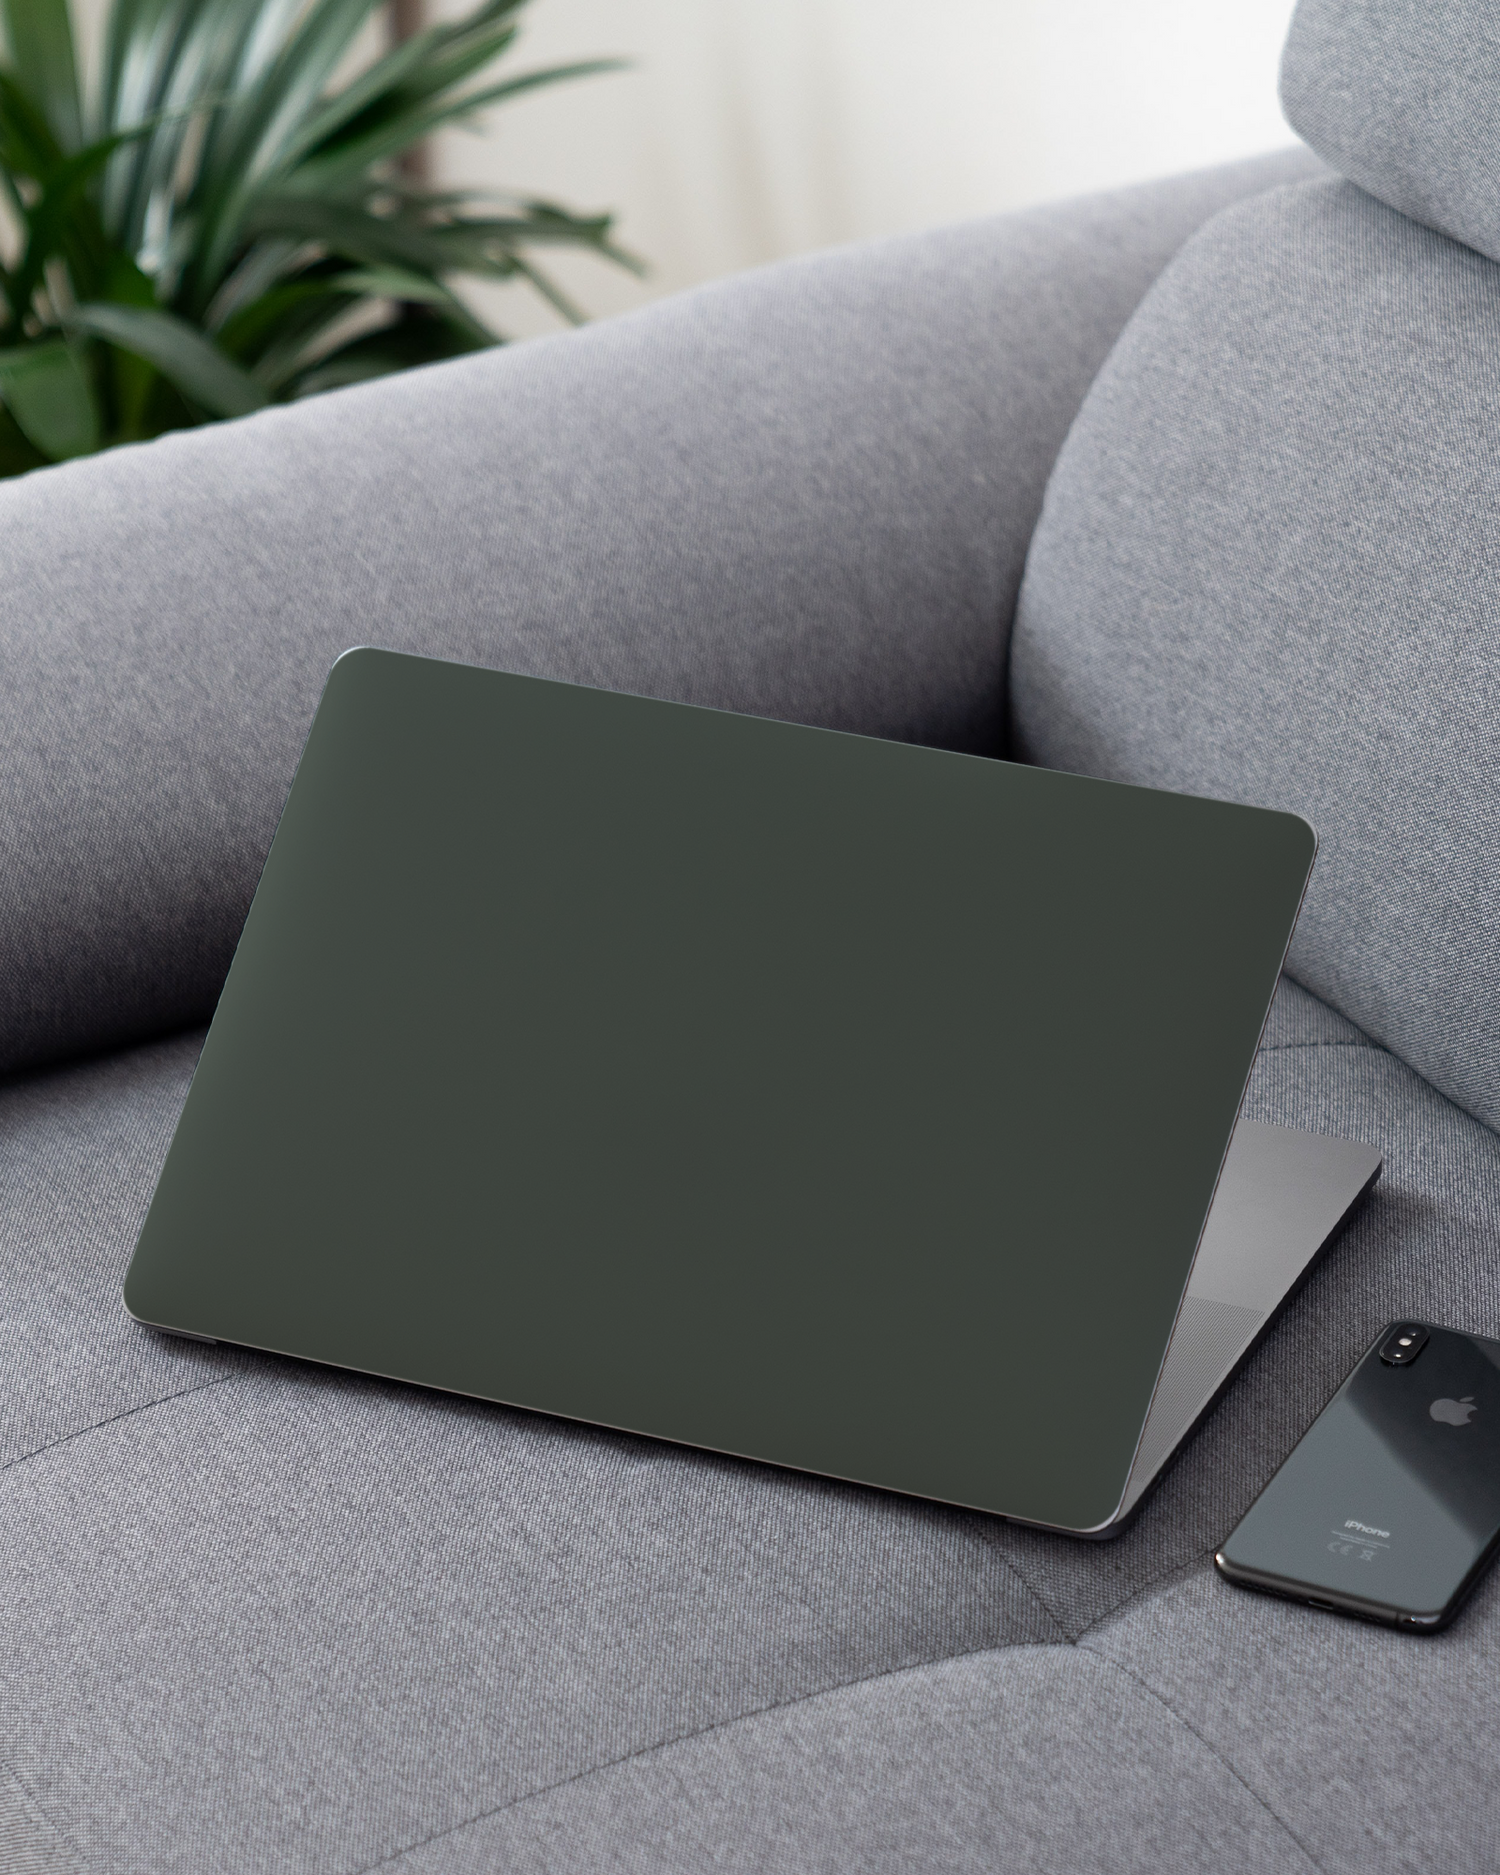 MIDNIGHT GREEN Laptop Skin for 13 inch Apple MacBooks on a couch